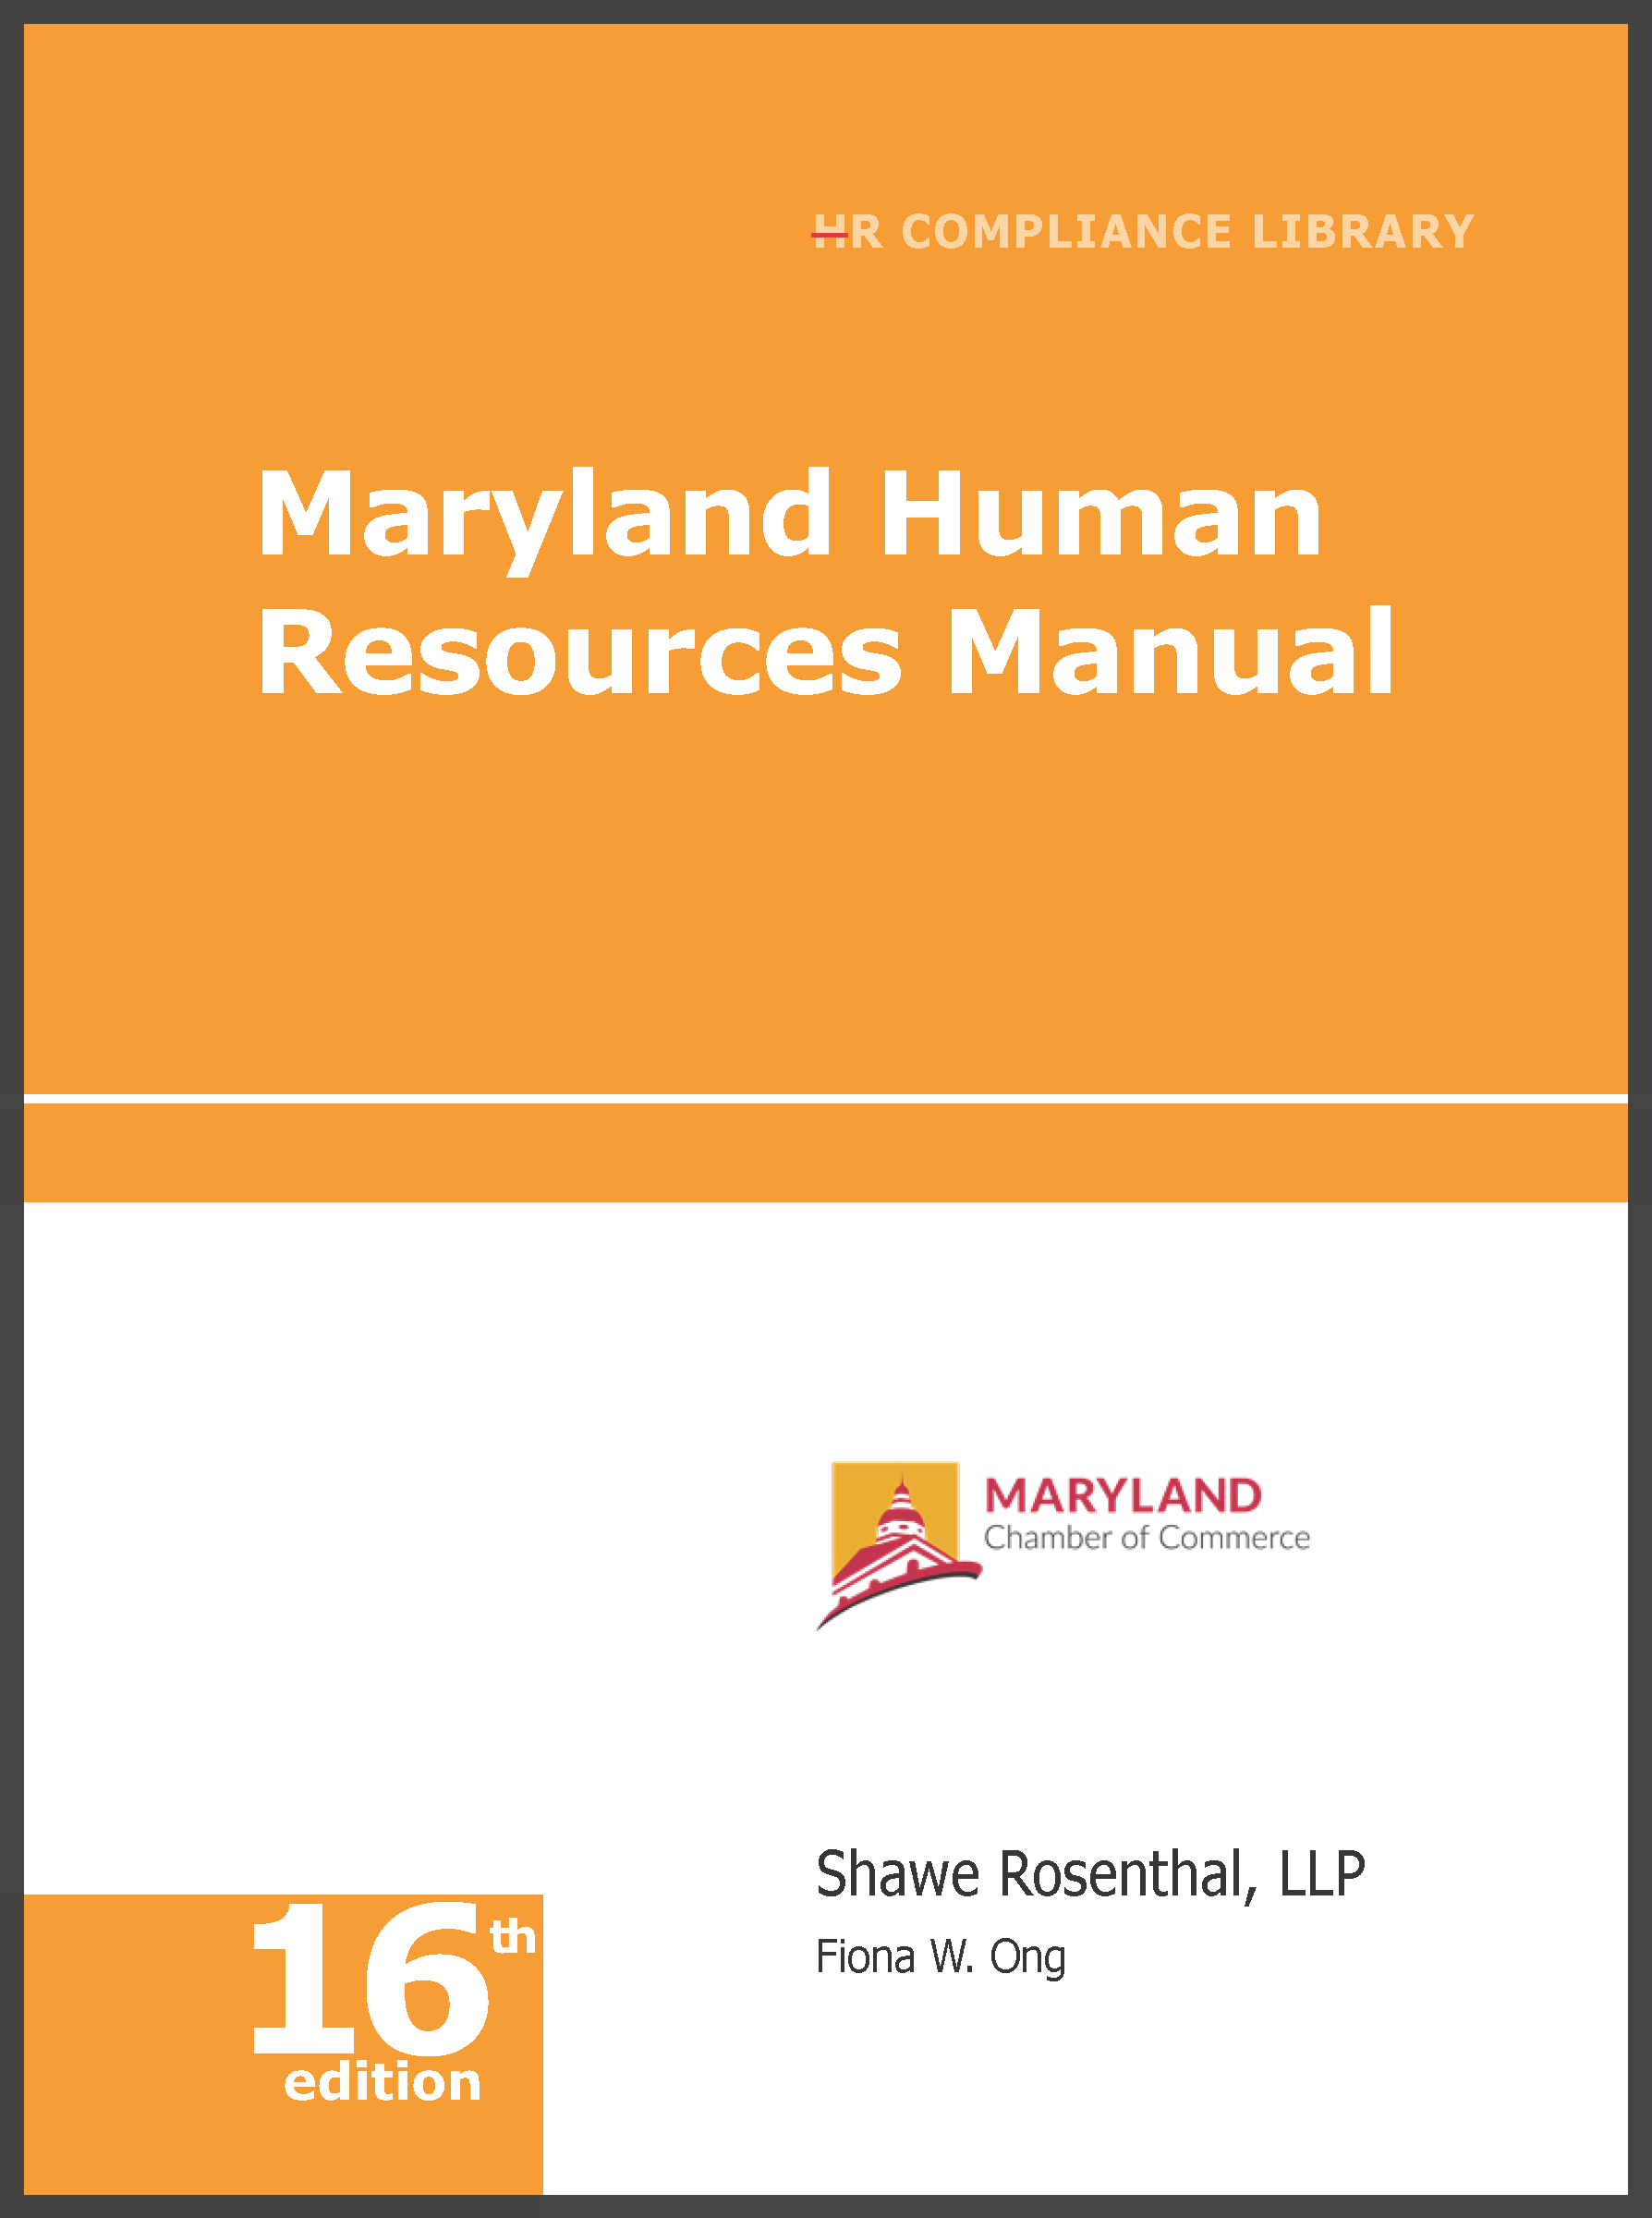 Maryland Human Resources Library employment law image, remote work, labor laws, employment laws, right to work, order of protection, minimum wage